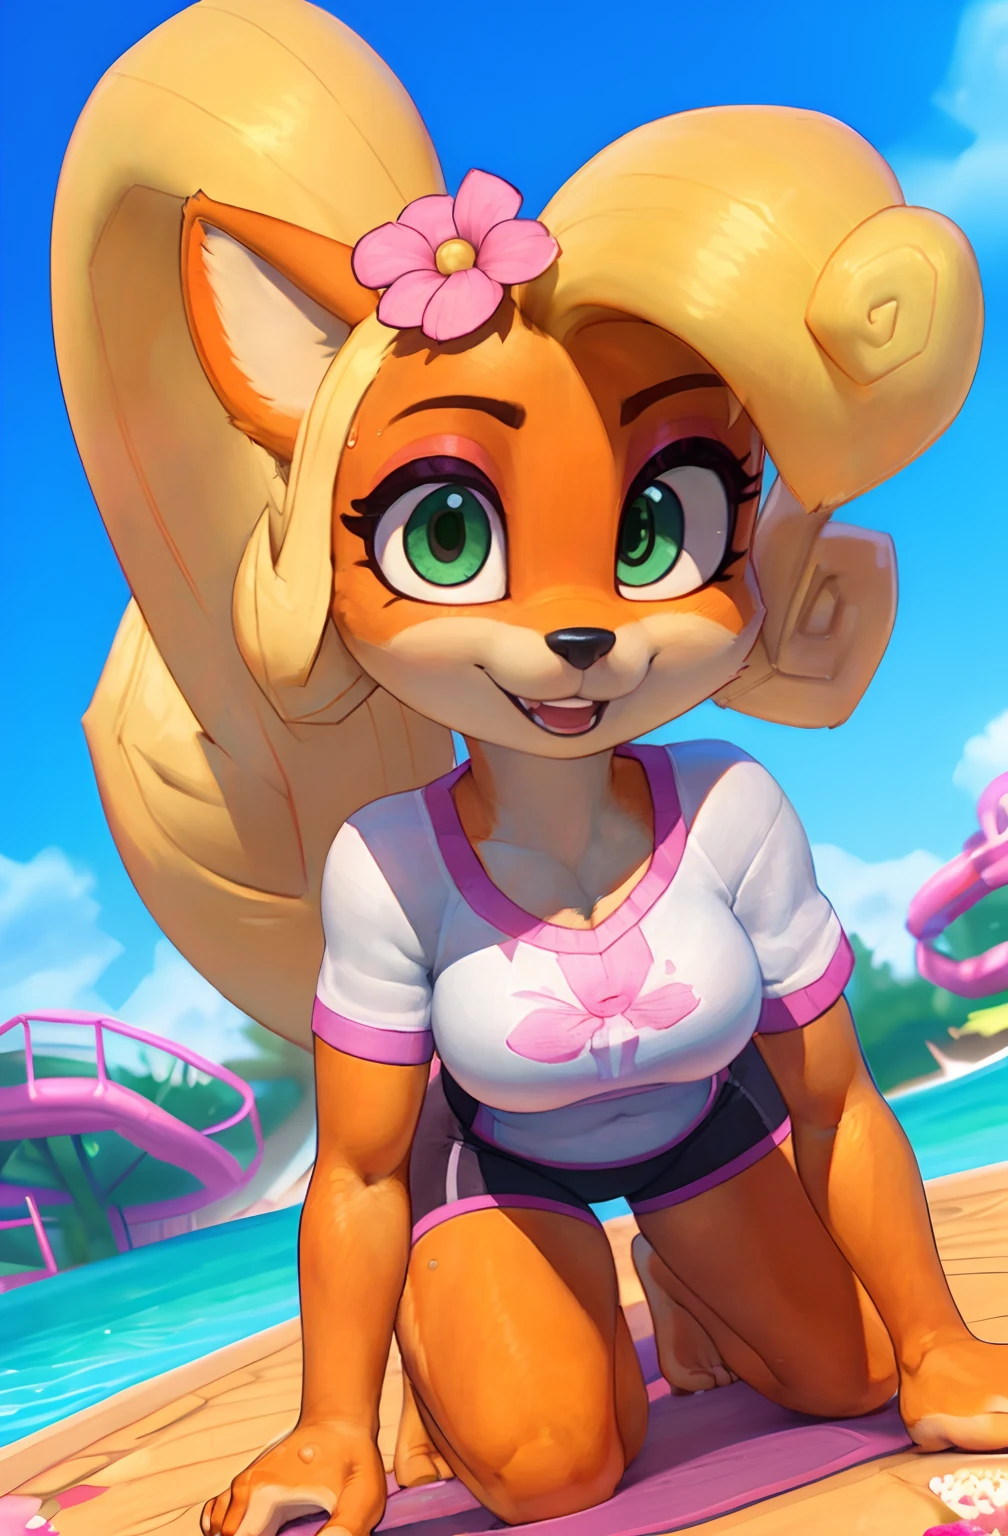 [Coco bandicoot], [Uploaded to e621.net; (Pixelsketcher), (wamudraws)], ((masterpiece)), ((solo portrait)), ((full body)), ((front view)), ((feet visible)), ((furry; anthro)), ((detailed fur)), ((detailed shading)), ((beautiful 3D art)), {anthro; (orange fur, black nose), cute green eyes, happy open smile, blonde curly hair, curly ponytail, camel toe}, {(pink flower on white shirt), (tight high-legged yoga shorts), small , (beautiful feet), (pink flower in hair)}, {(crawl), (all fours), (splash)}, [background; (water park), (blue sky), (sunny)]